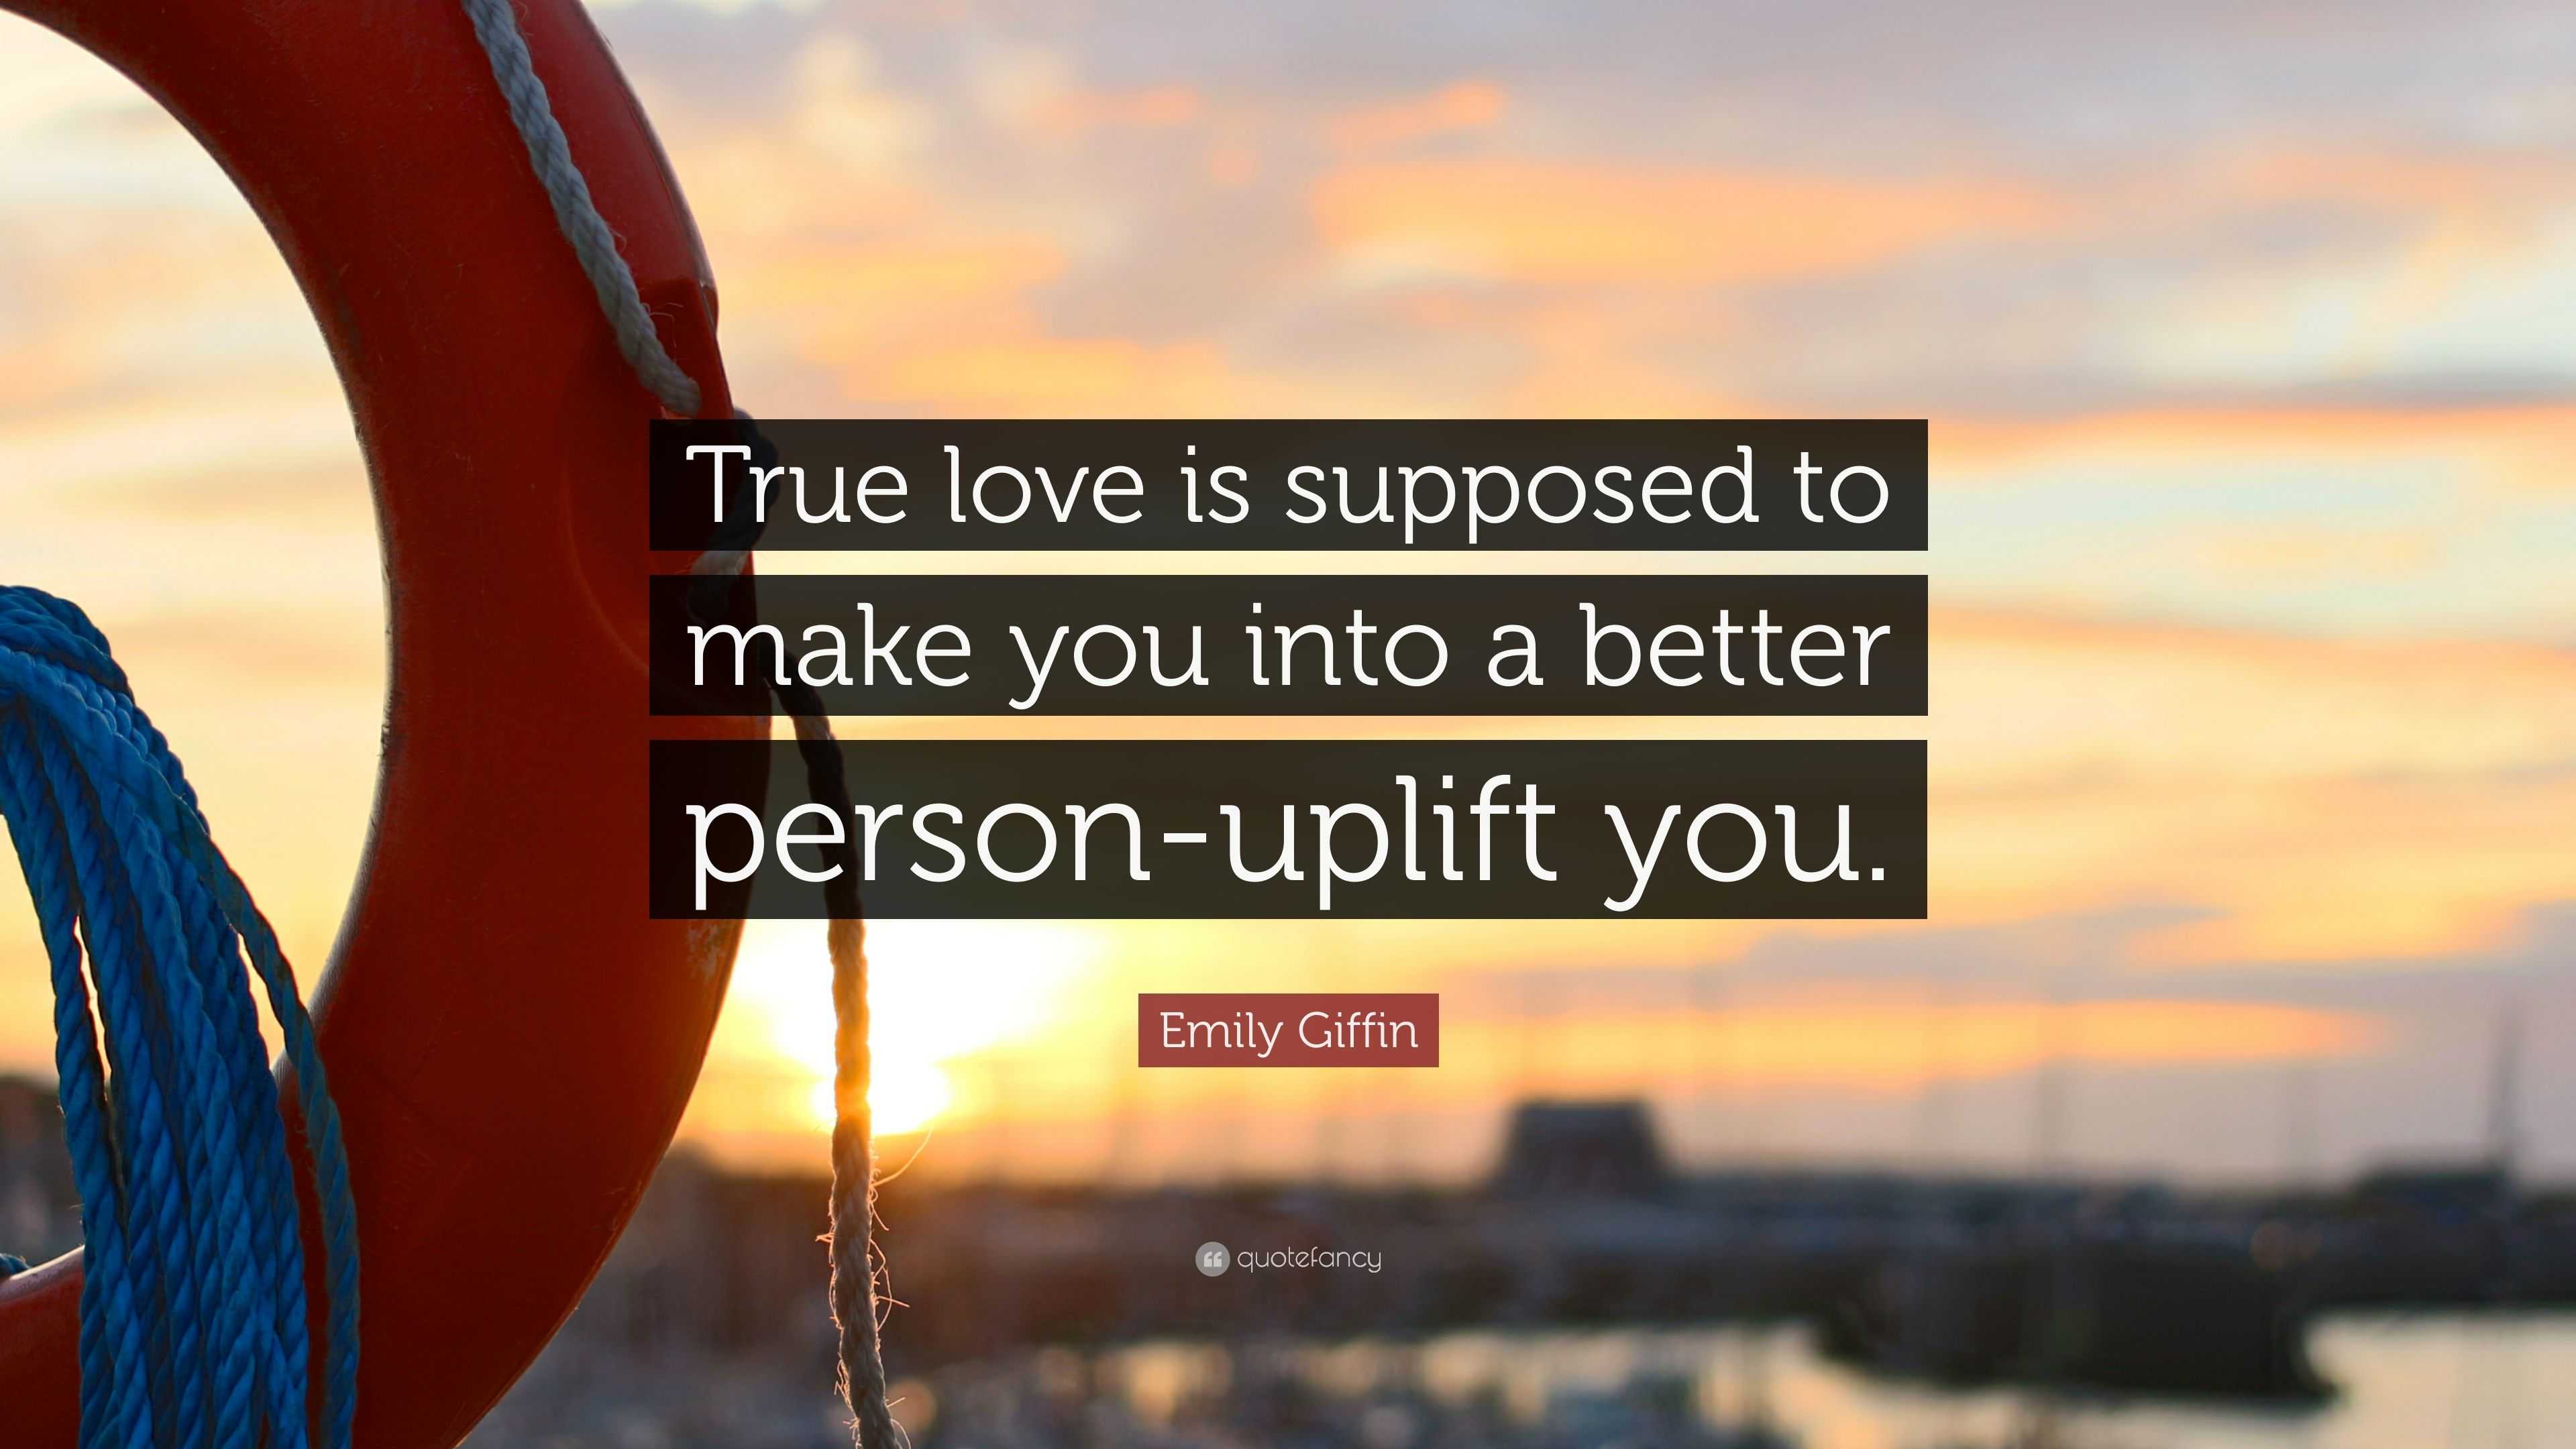 Emily Giffin Quote: “True love is supposed to make you into a better  person-uplift you.”